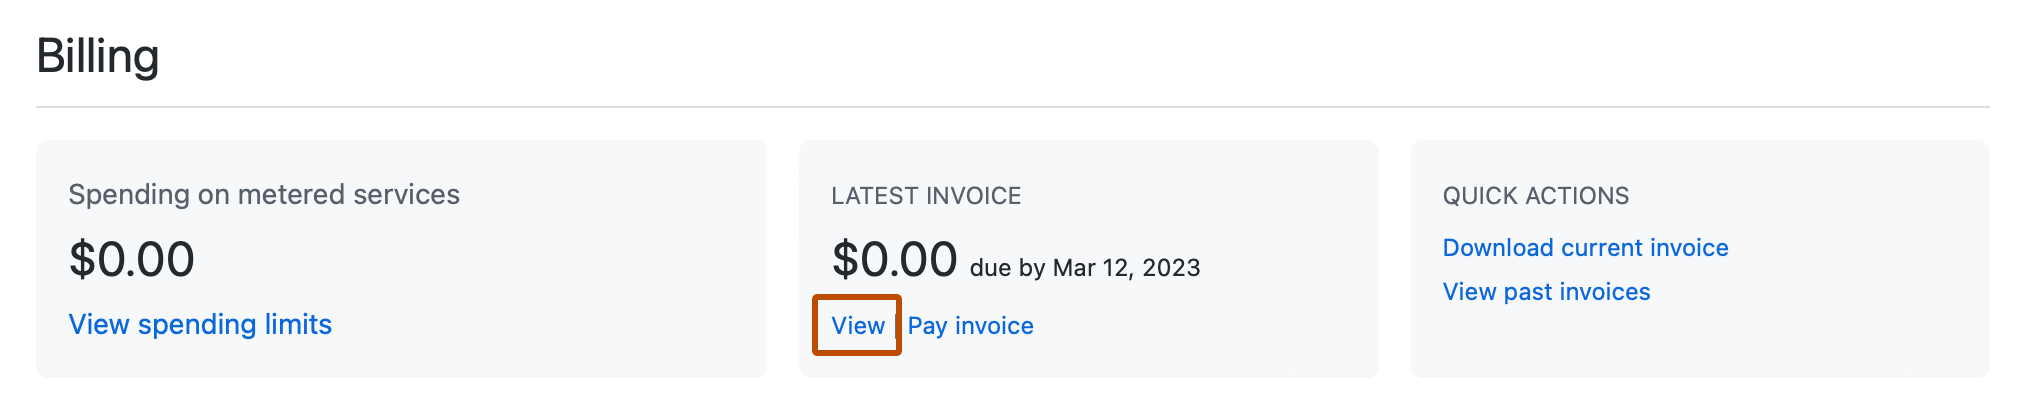 [View invoice] リンク